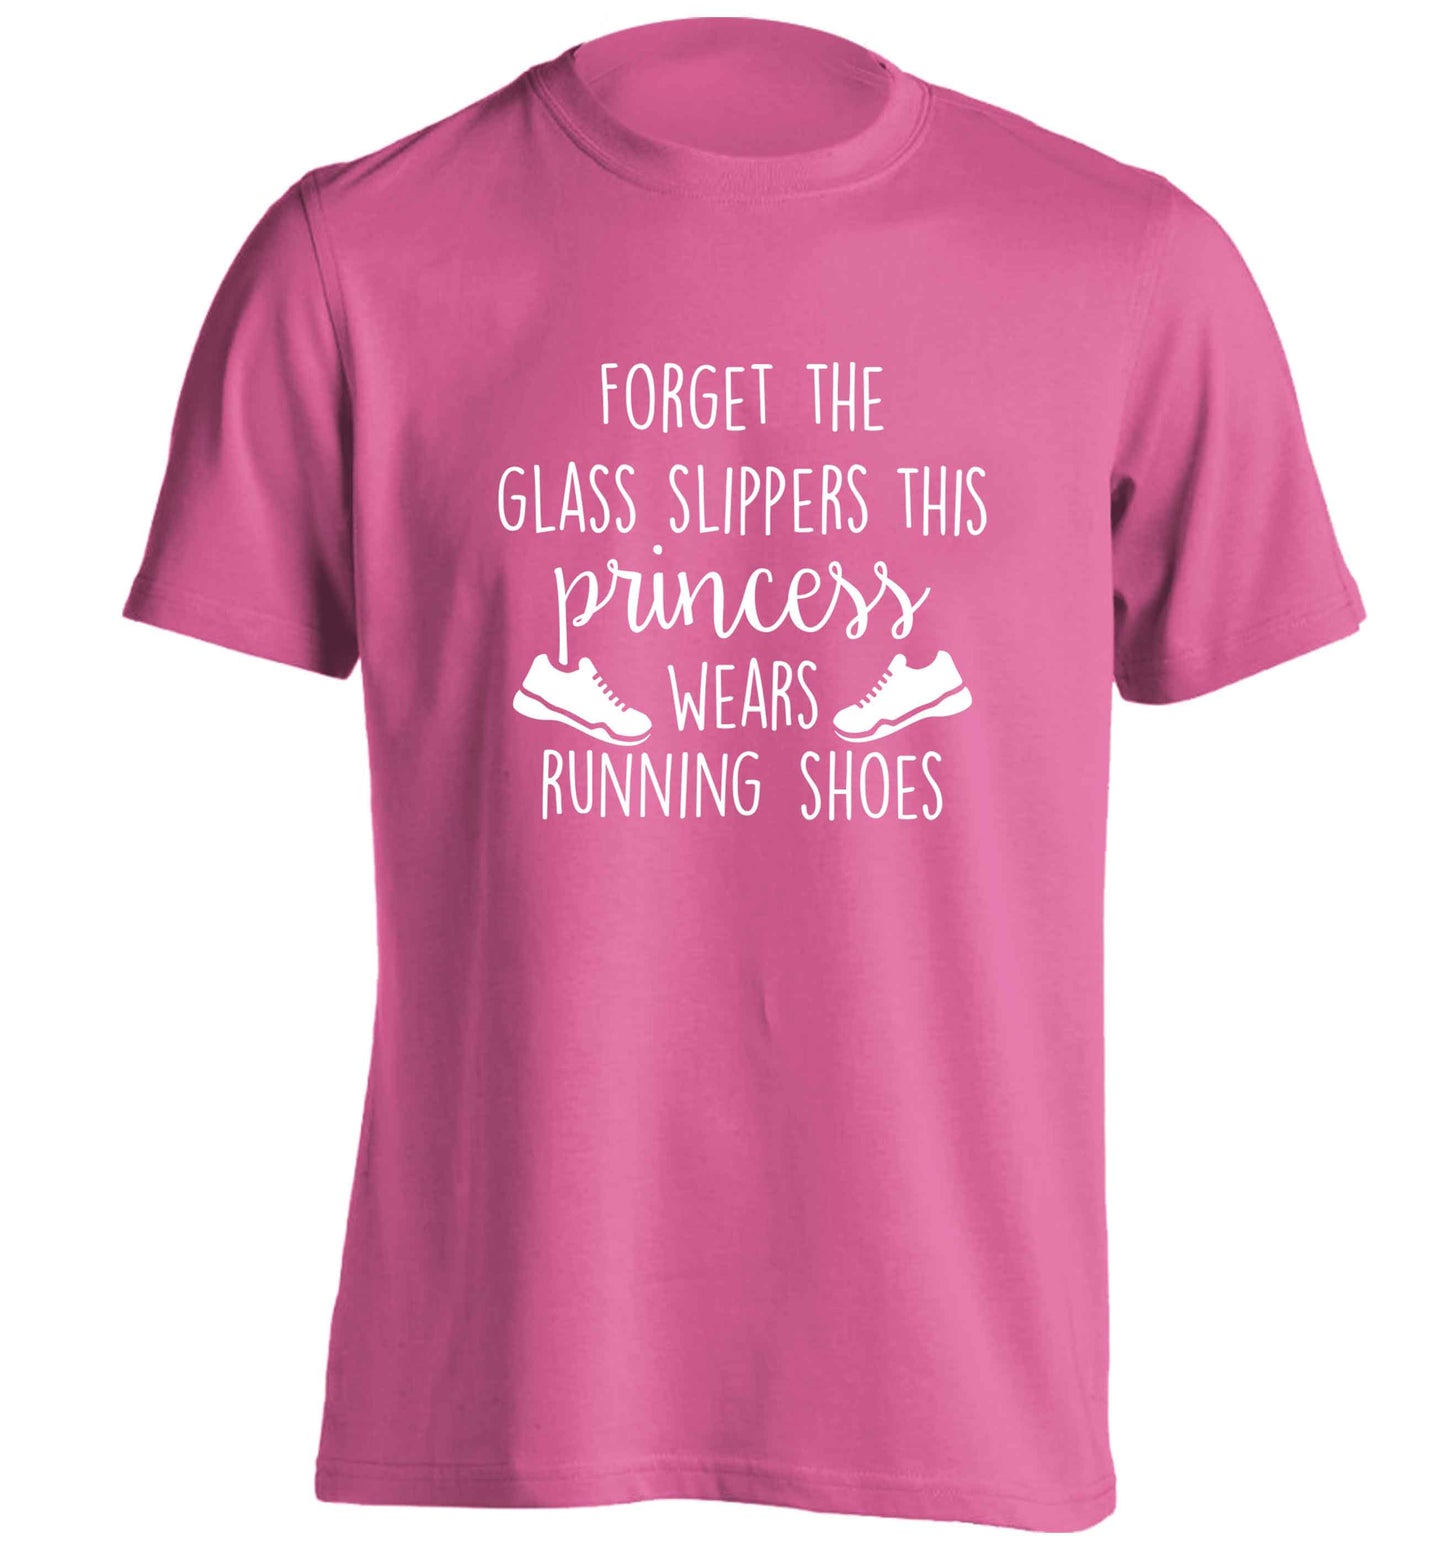 Forget the glass slippers this princess wears running shoes adults unisex pink Tshirt 2XL